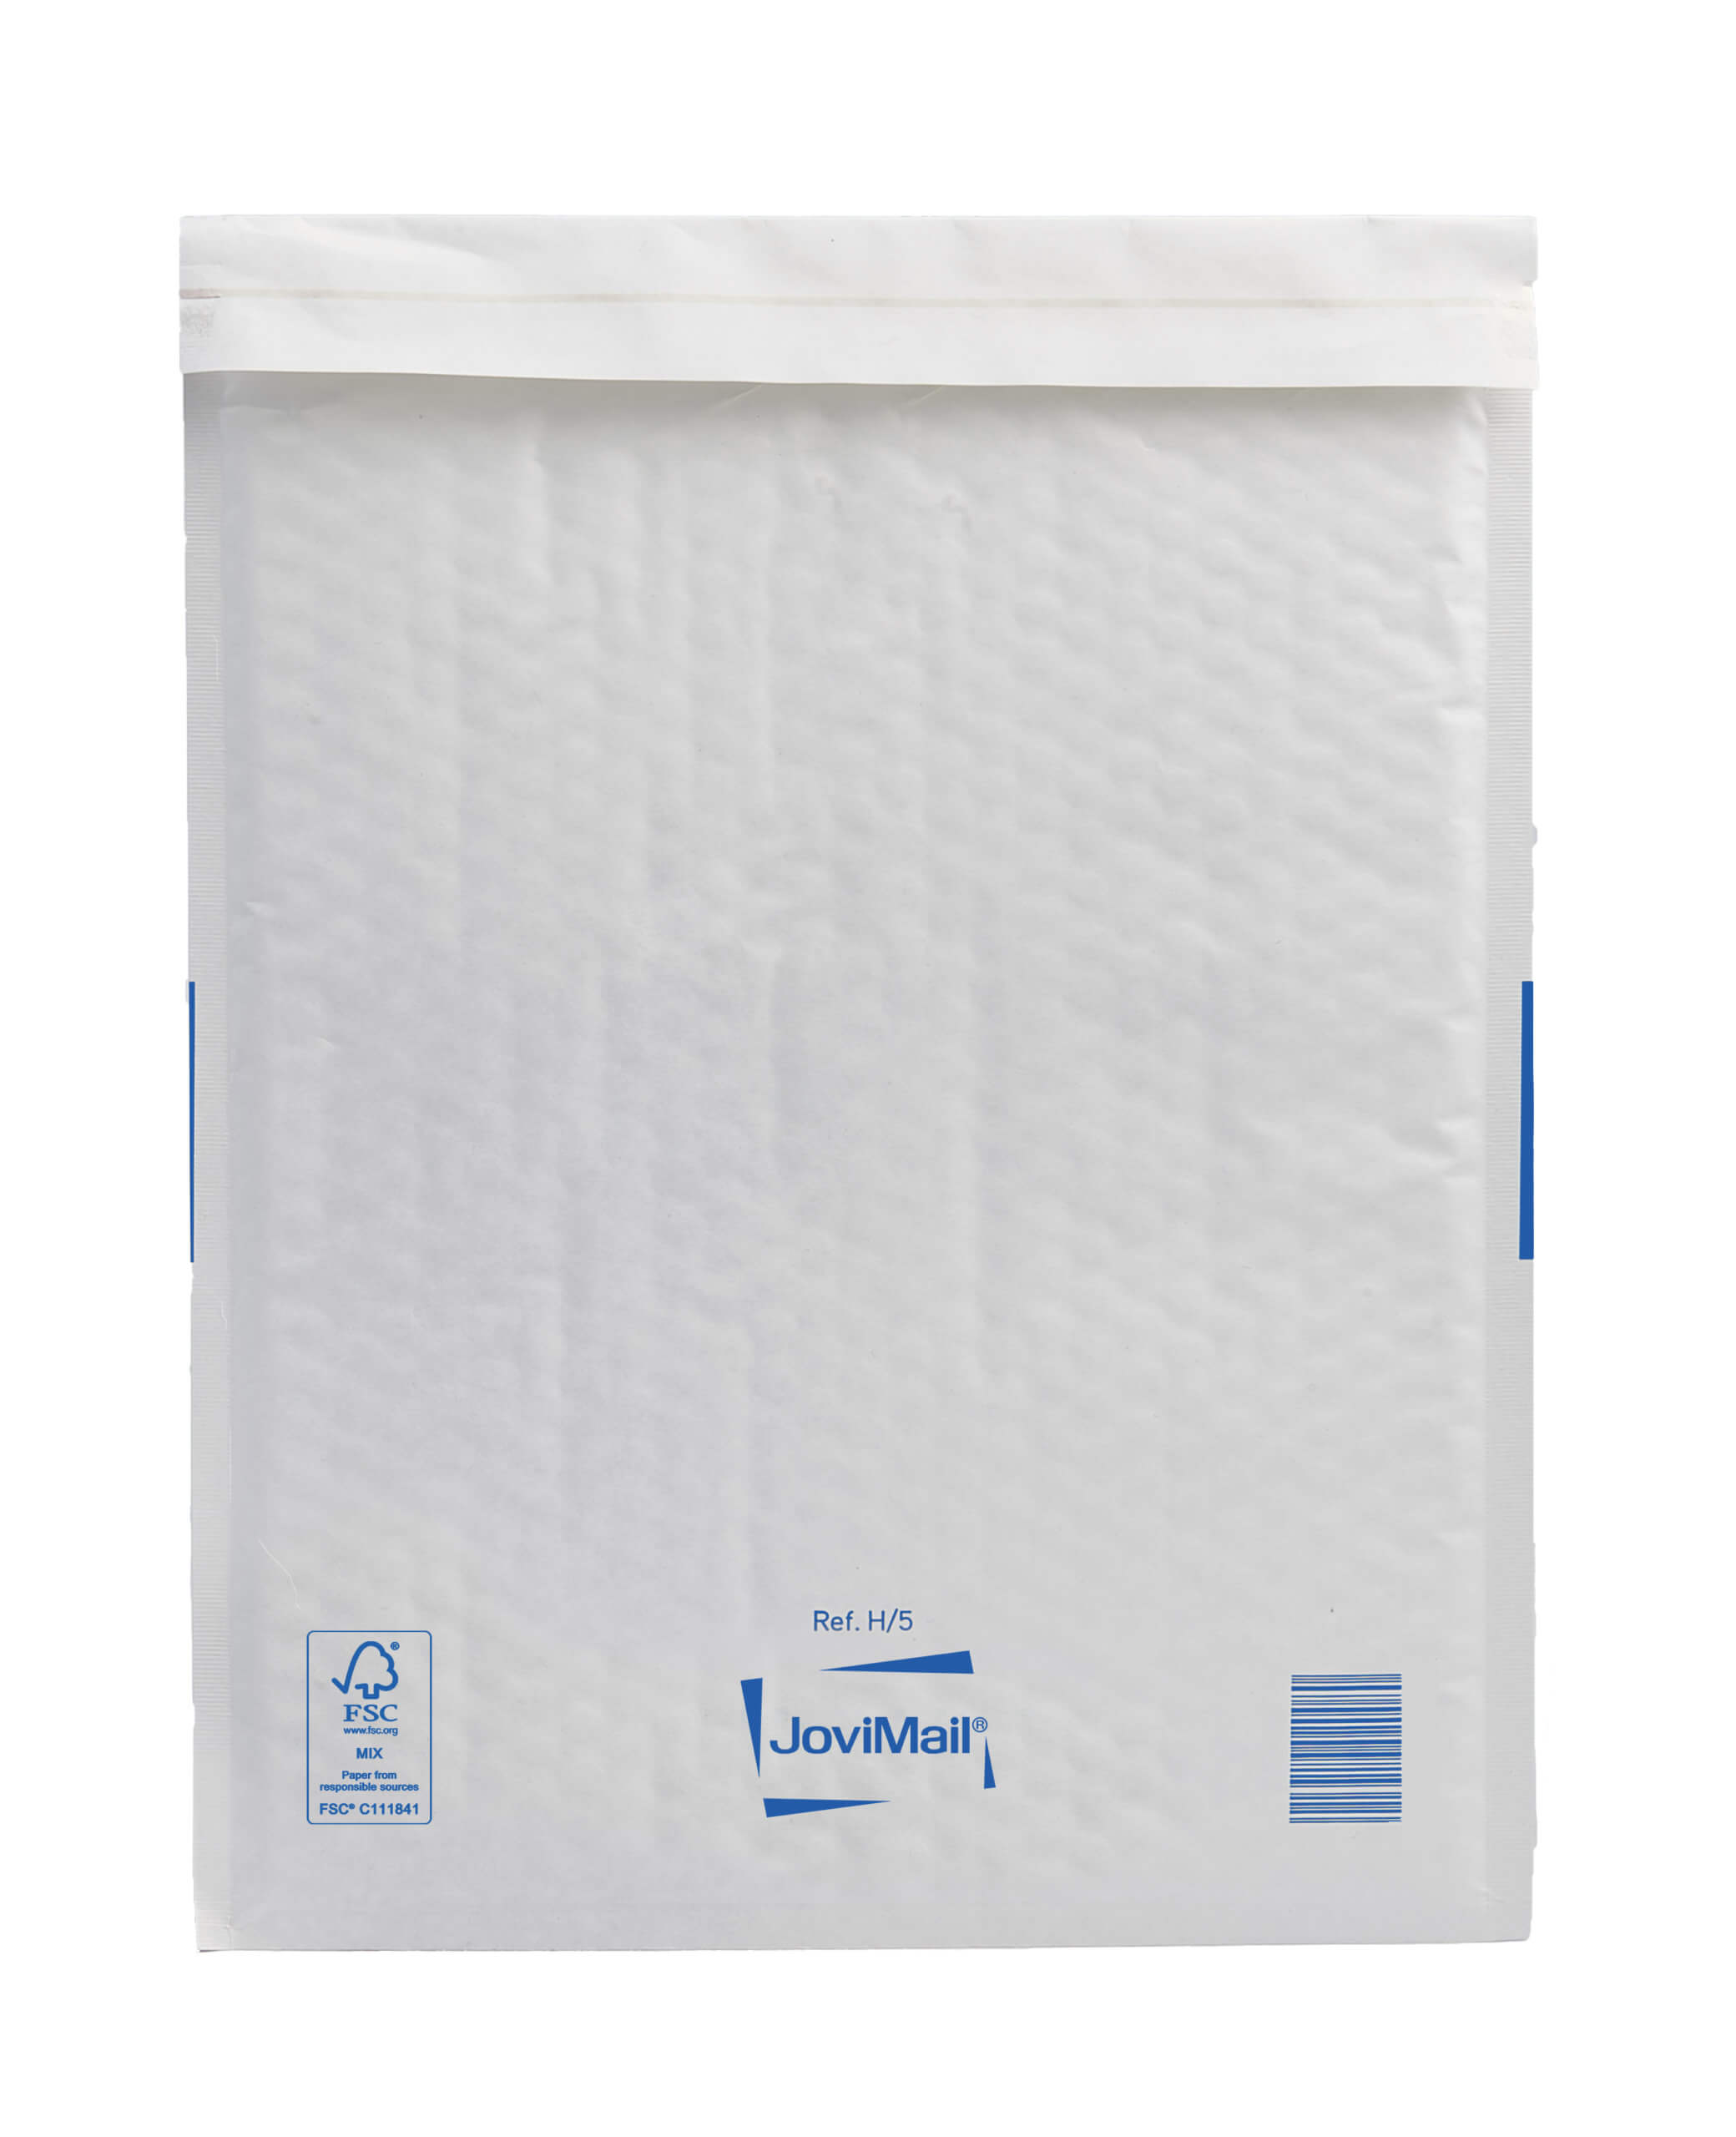 Enveloppe bulle Mail Lite JoviMail® blanche taille H/5 - 270x360